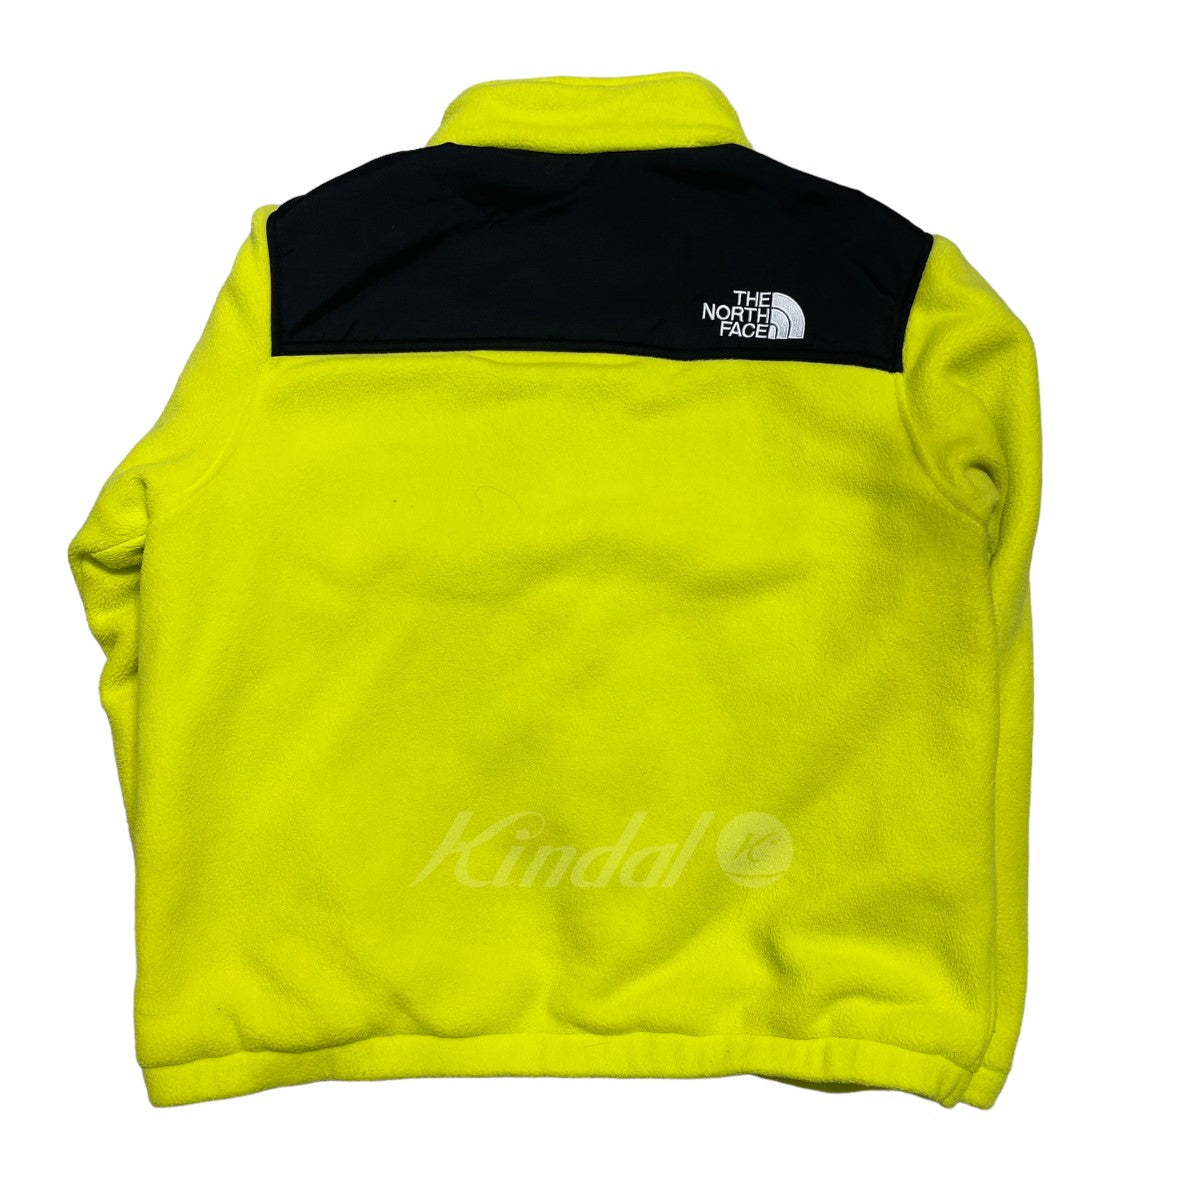 SUPREME×THE NORTH FACE Expedition Fleece jacket フリースジャケット ...